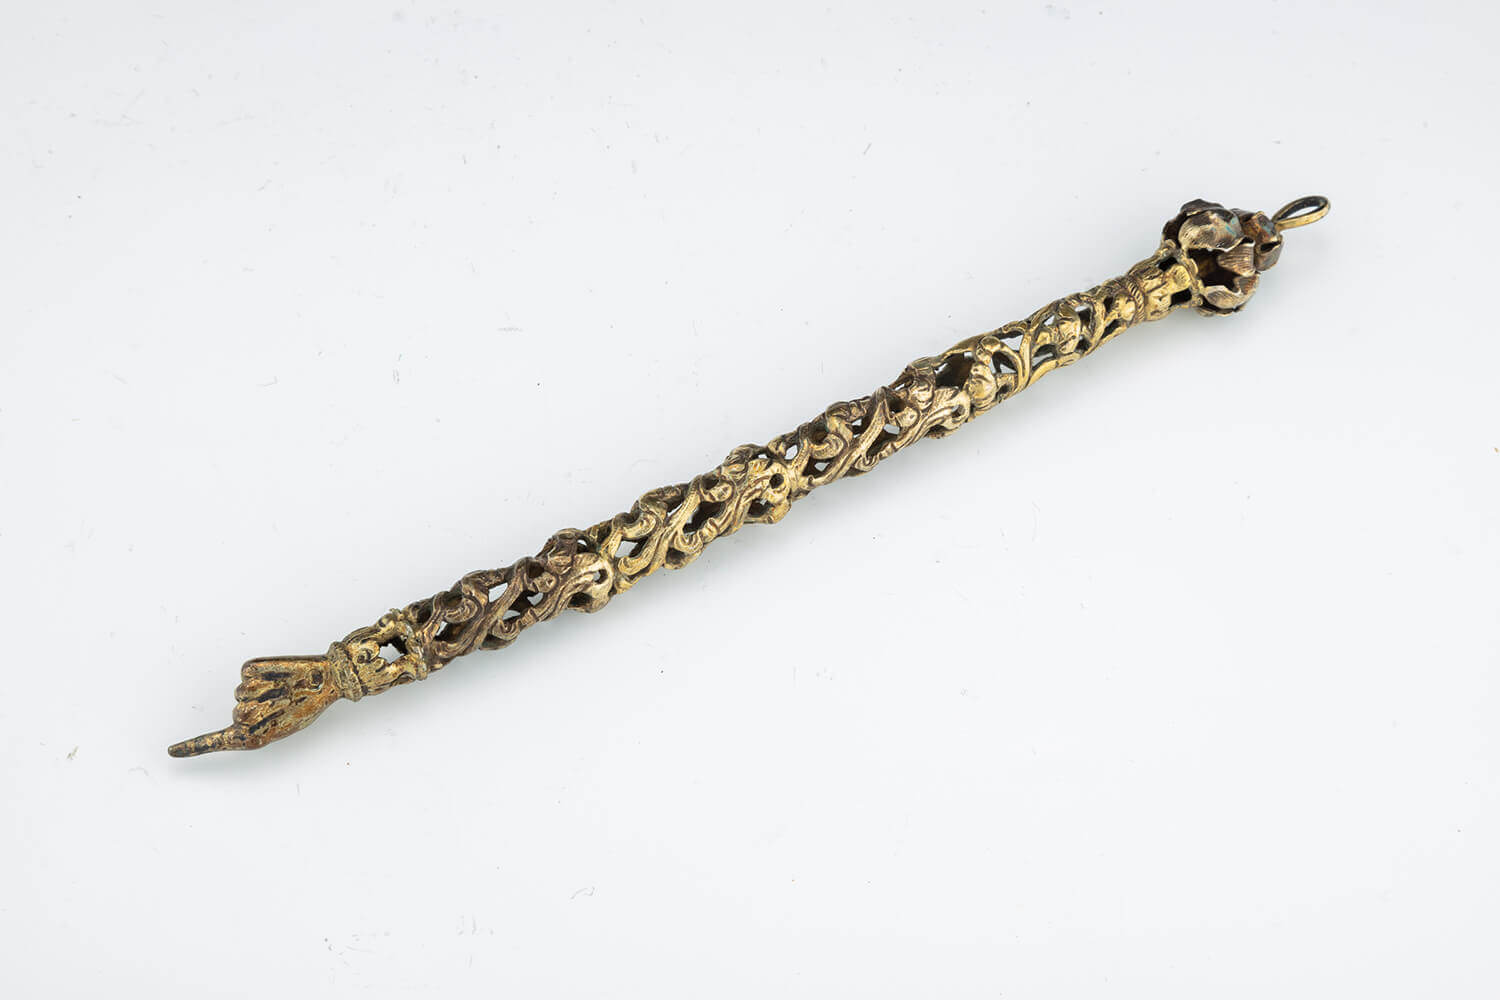 141. A RARE AND IMPORTANT SILVER TORAH POINTER